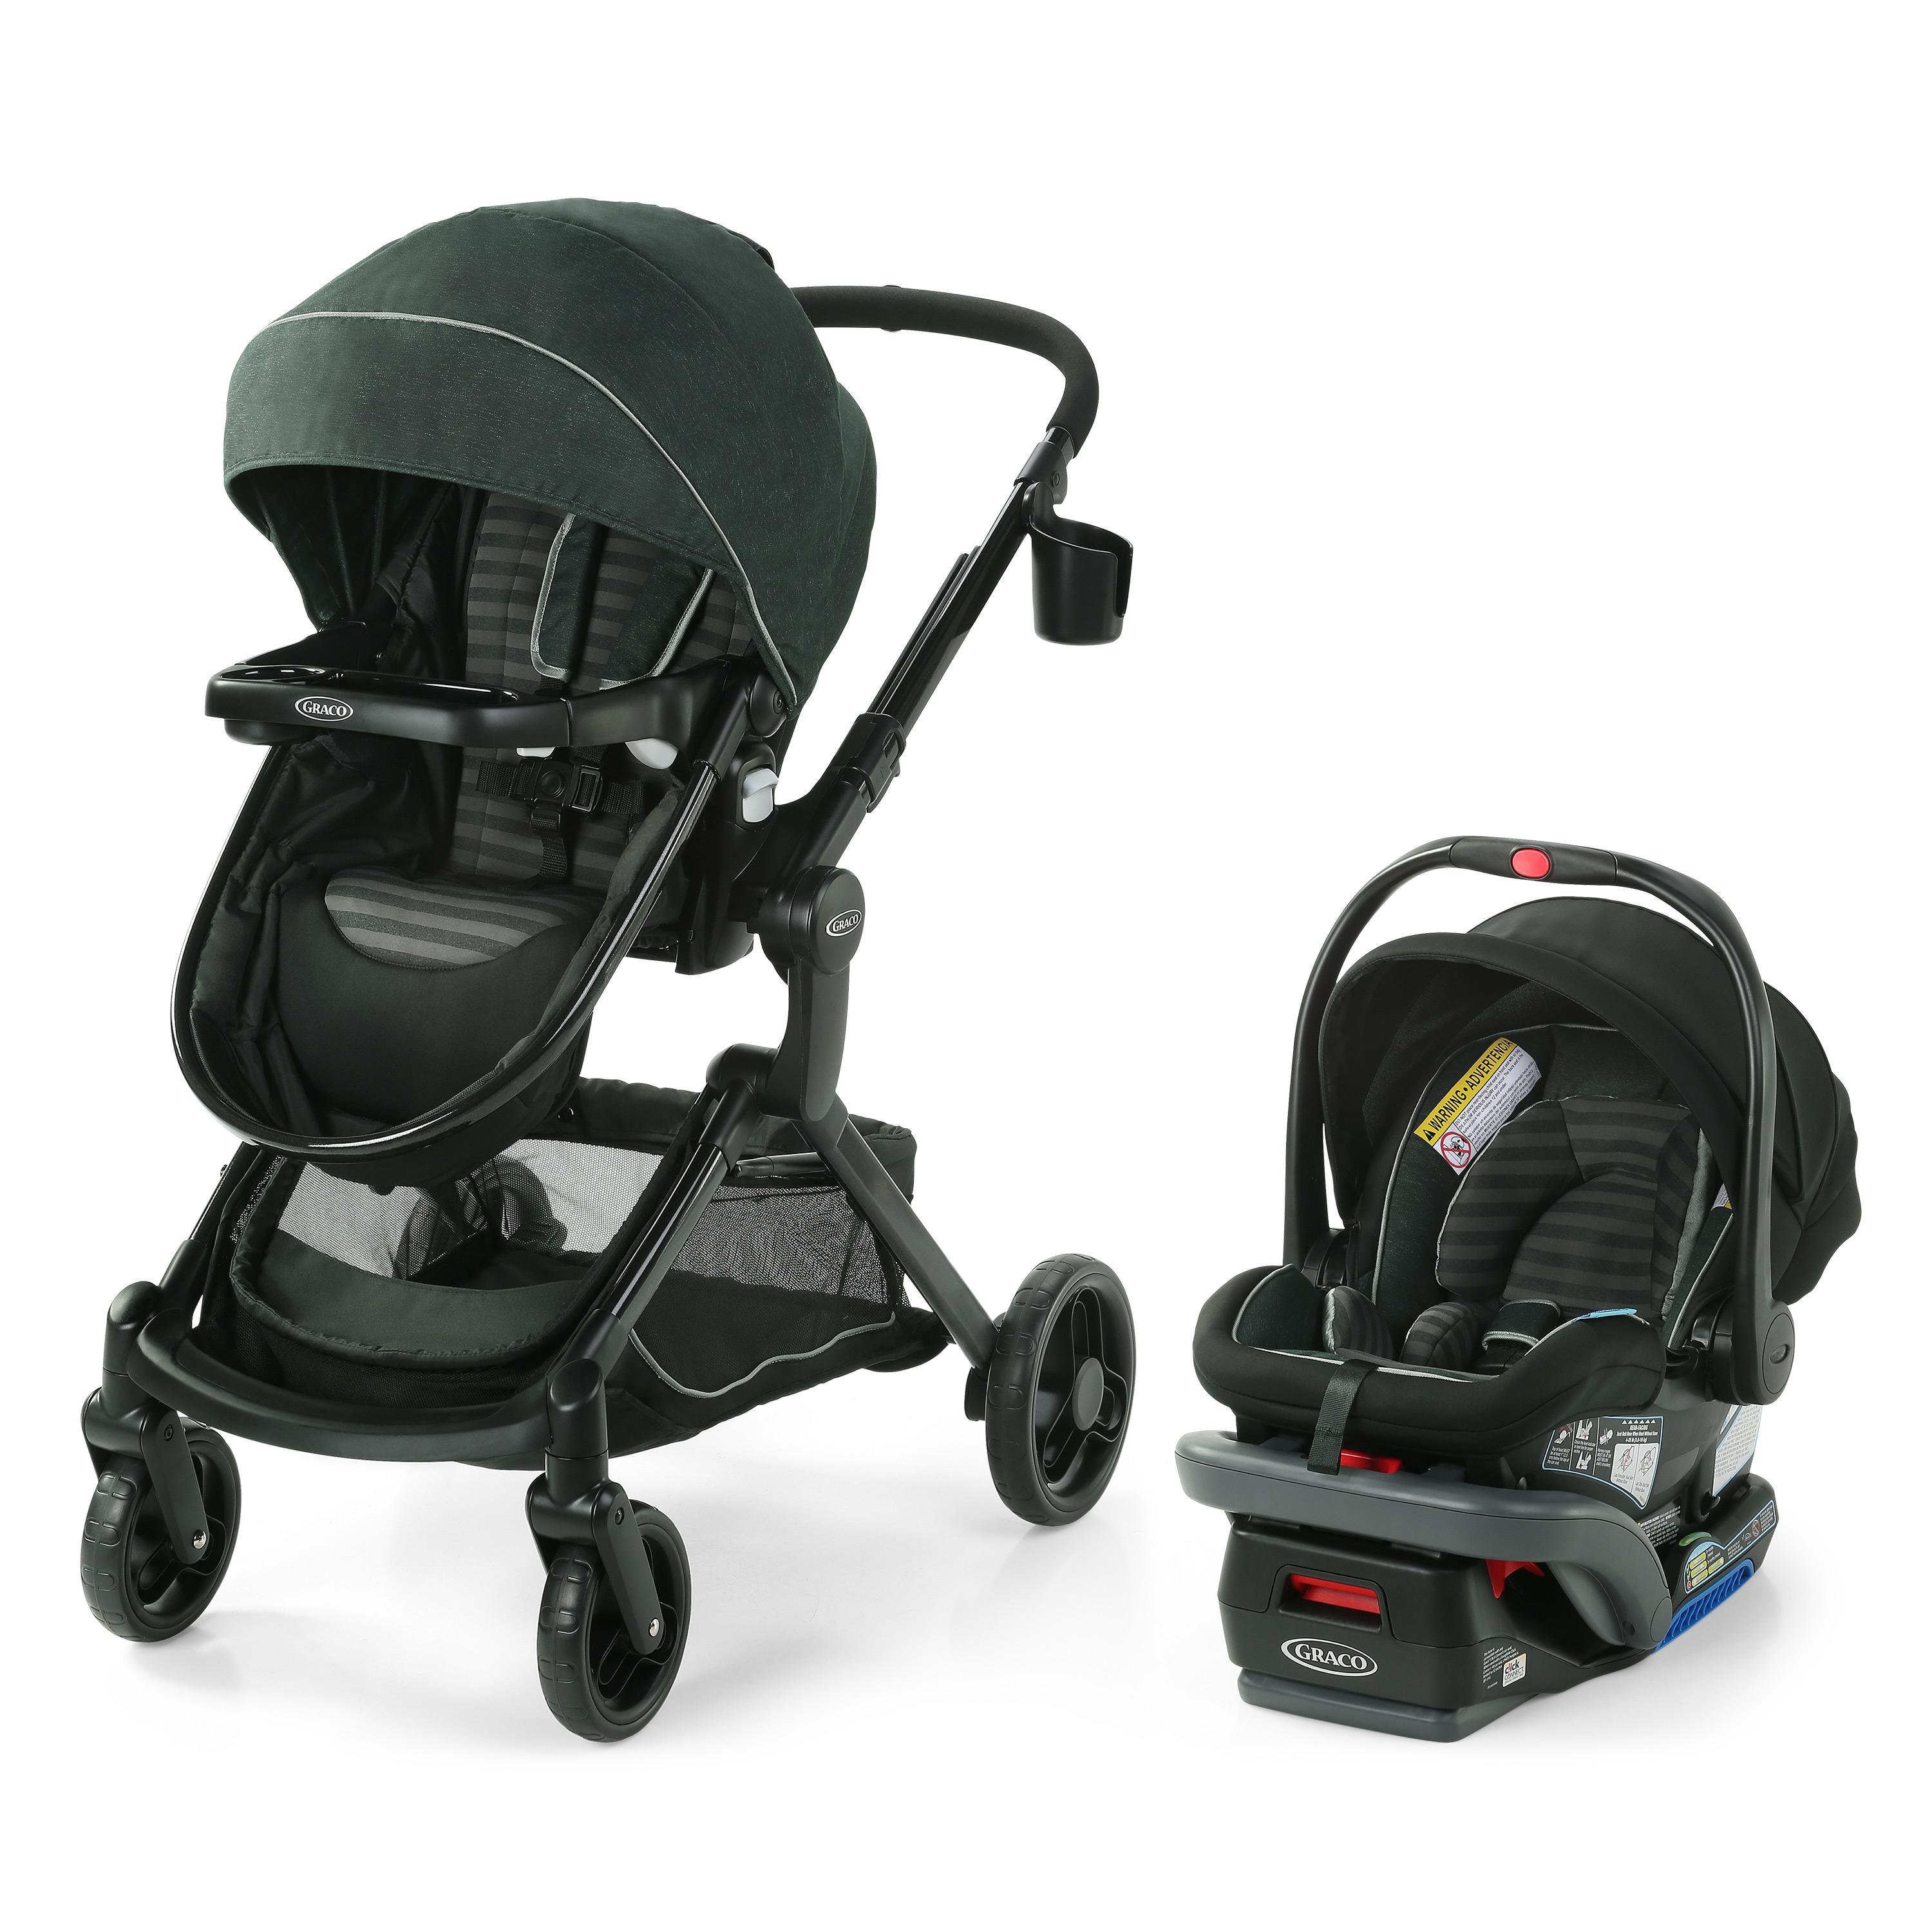 Graco Modes Nest DLX 3-in-1 Travel System